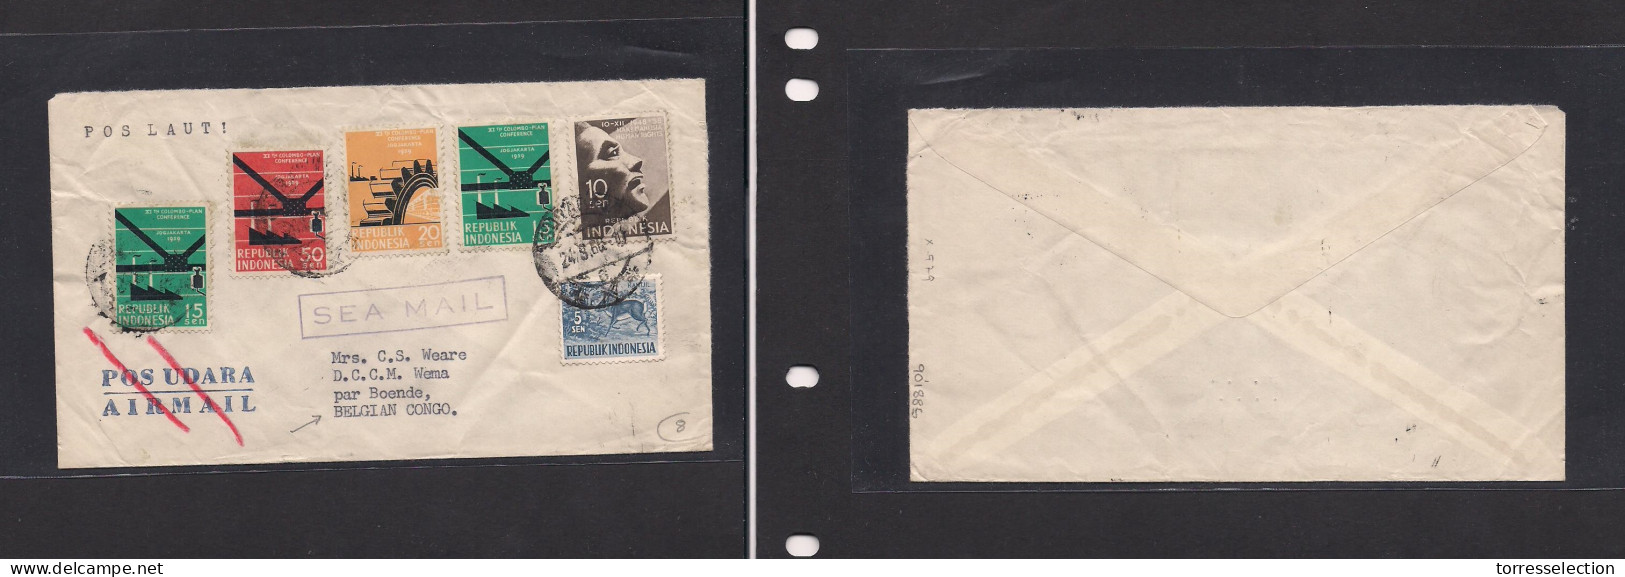 DUTCH INDIES. Dutch Indies - Cover - Indonesia 1960 Sea Mail Mult Fkd Env Fauna+industry, Fine. Easy Deal. XSALE. - Nederlands-Indië